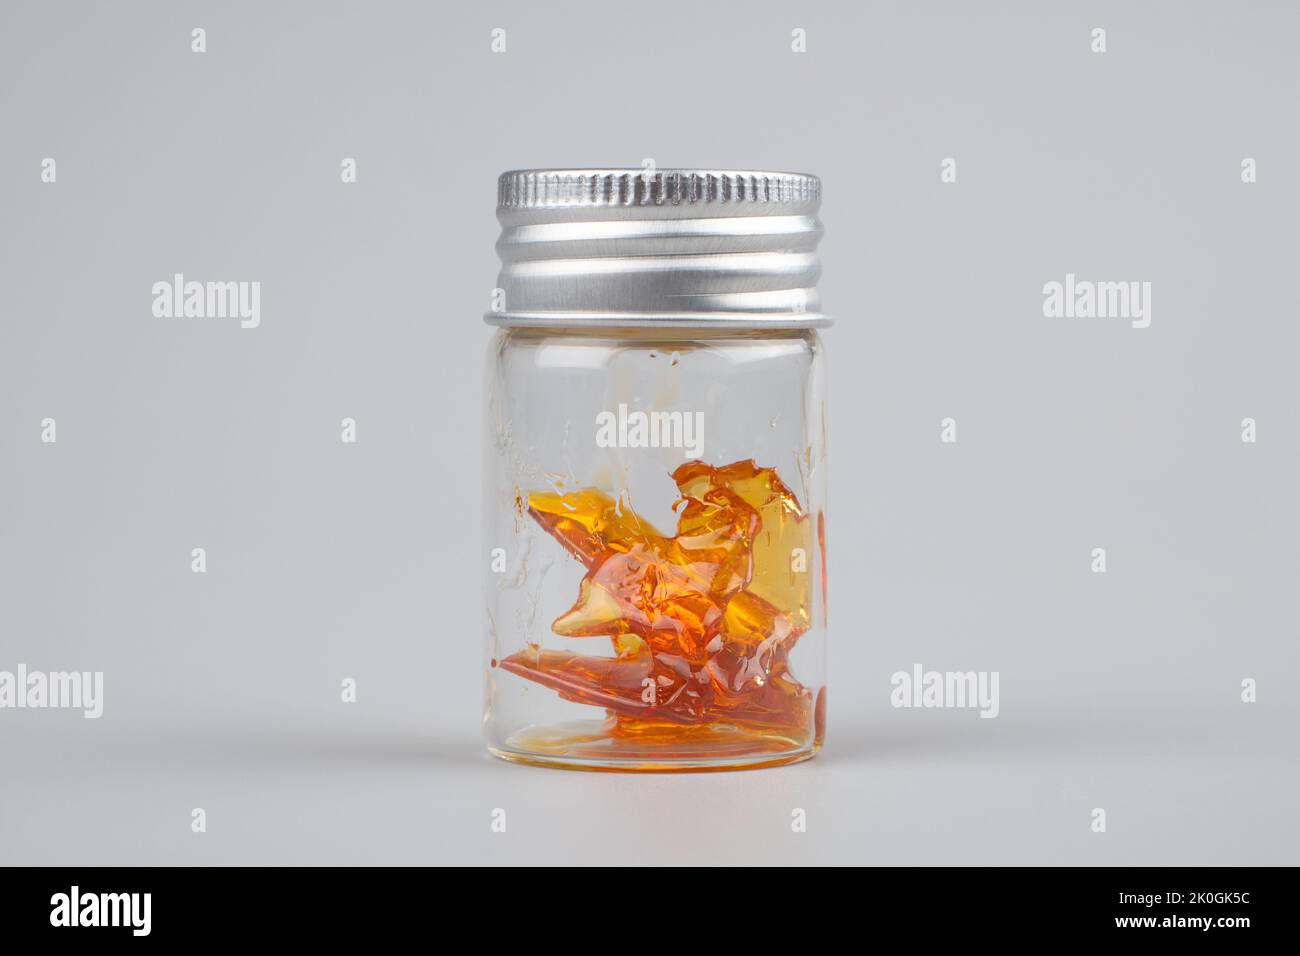 bottle with golden cannabis  extract wax closeup on gray background. Stock Photo